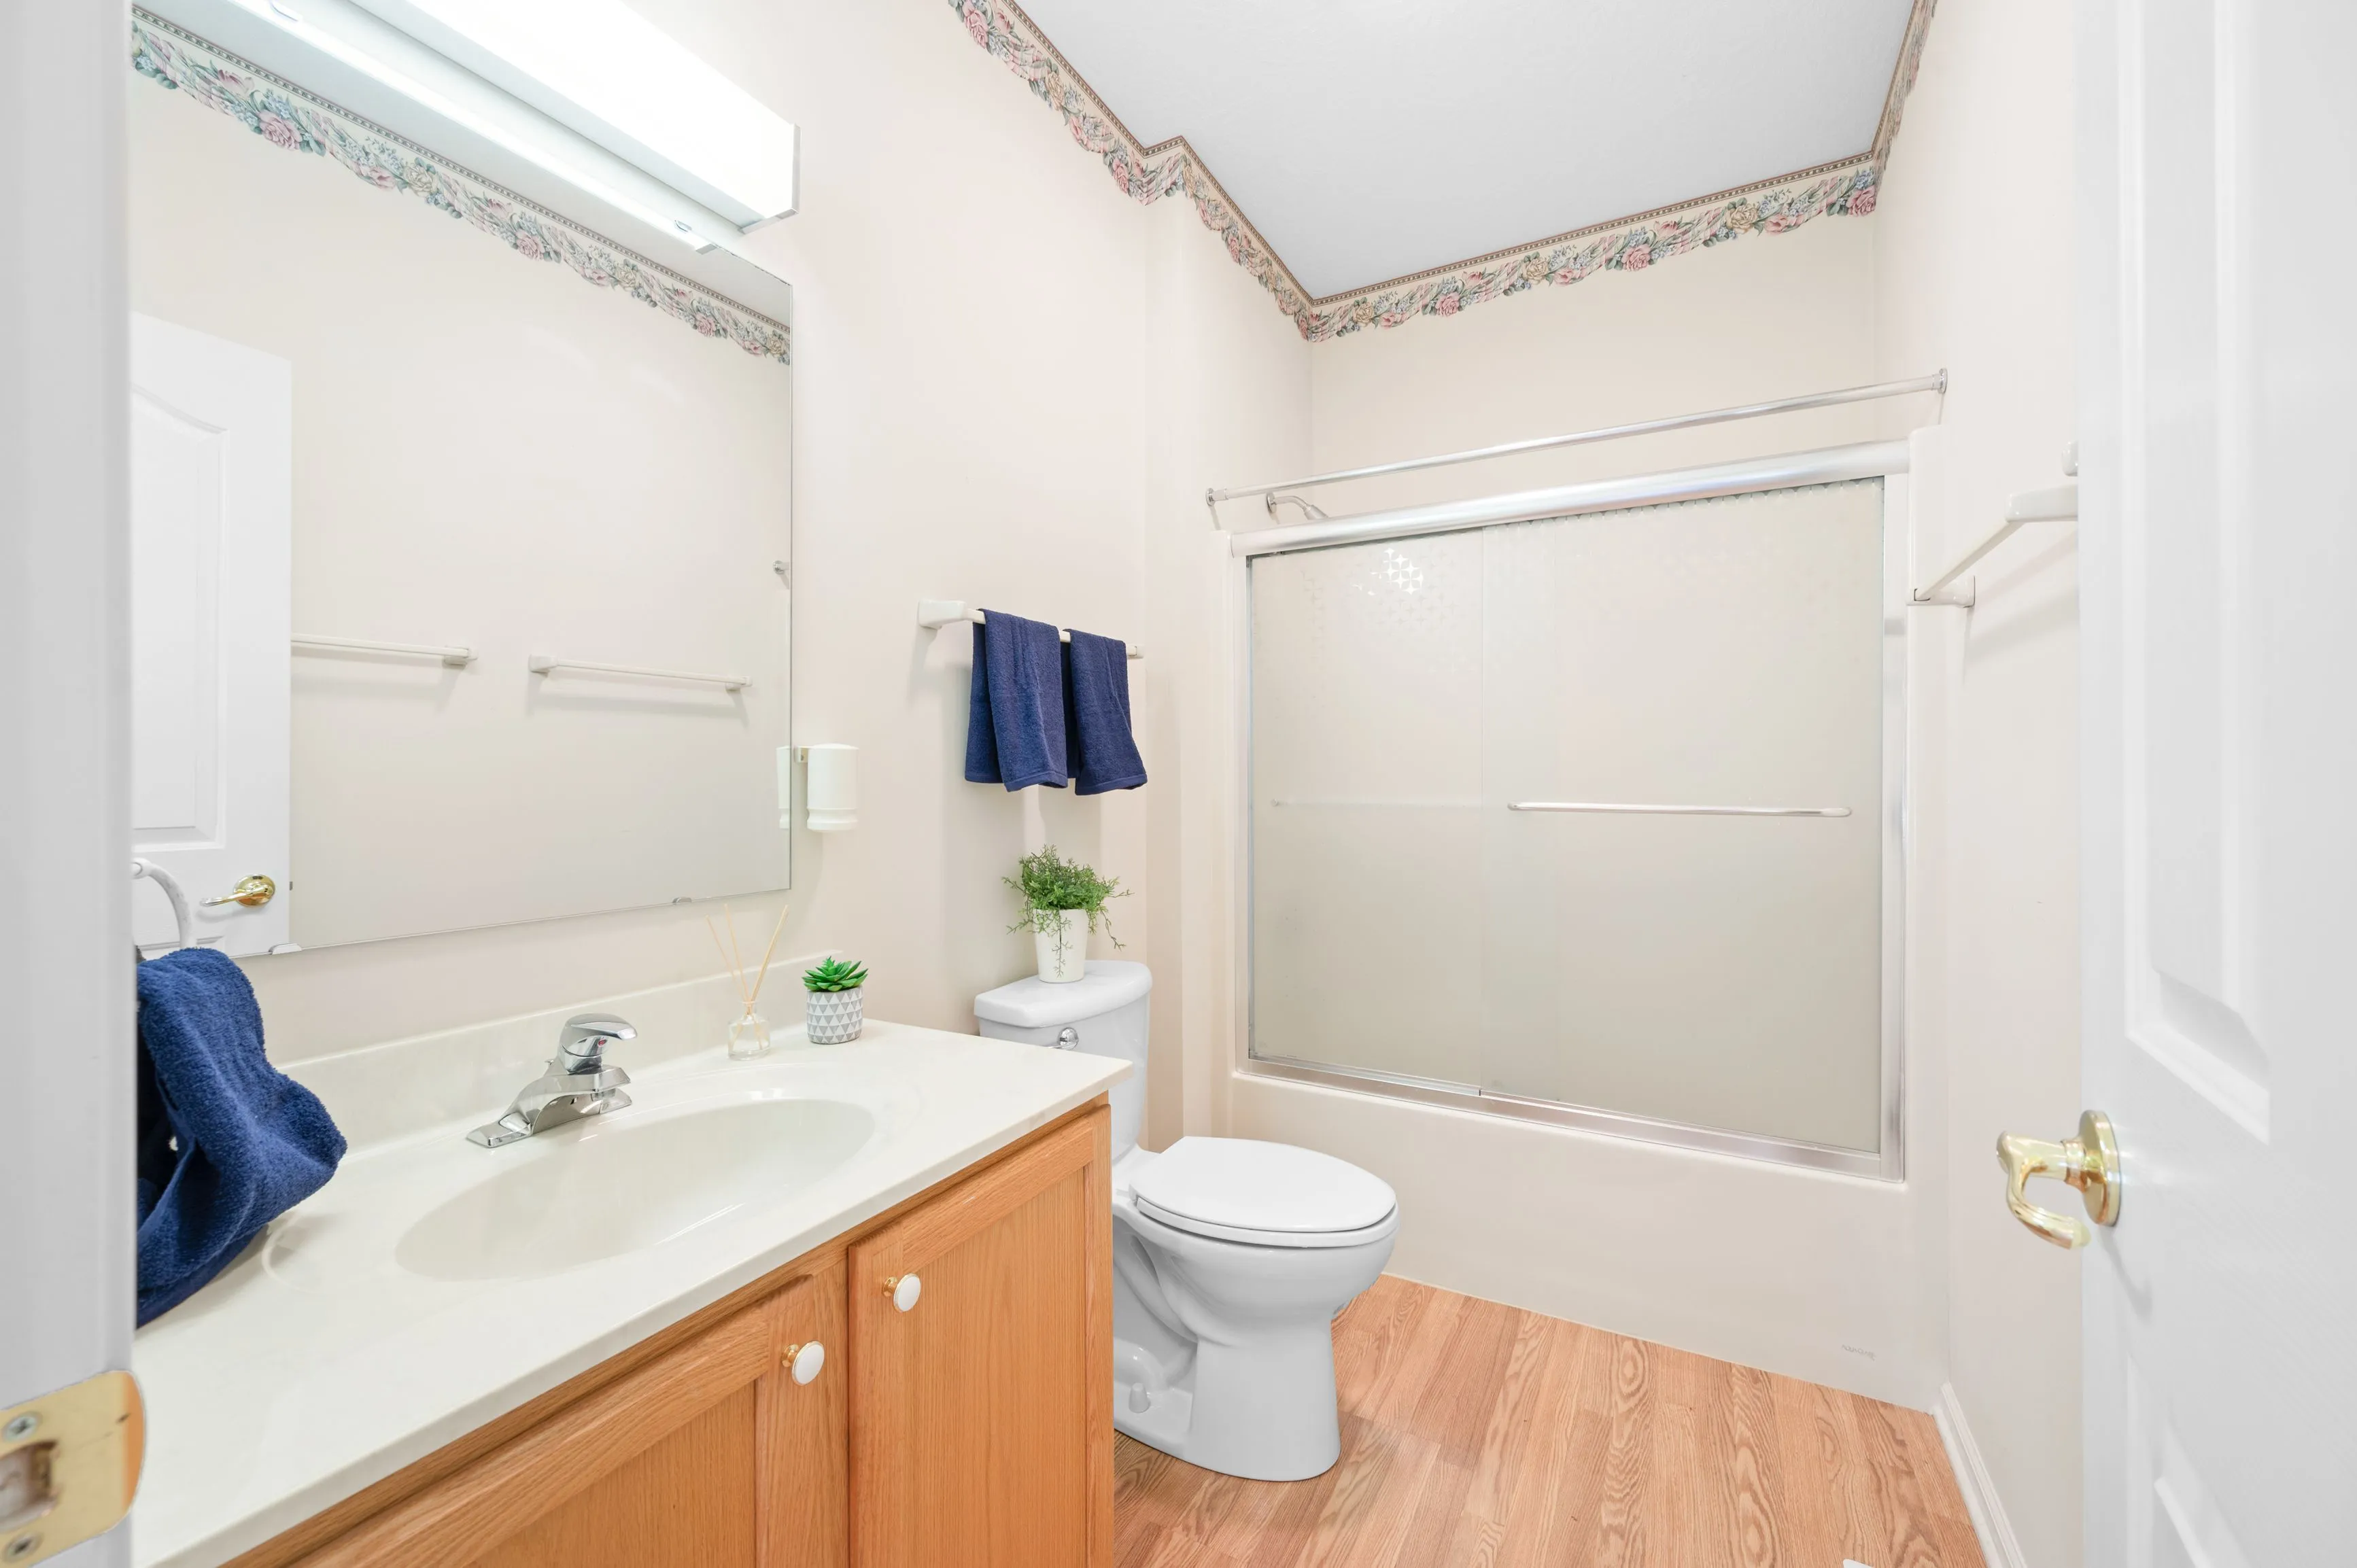 A clean and bright bathroom with wooden cabinets, a large mirror, a toilet, and a shower with a frosted glass door. Decorative elements include blue towels and small potted plants.